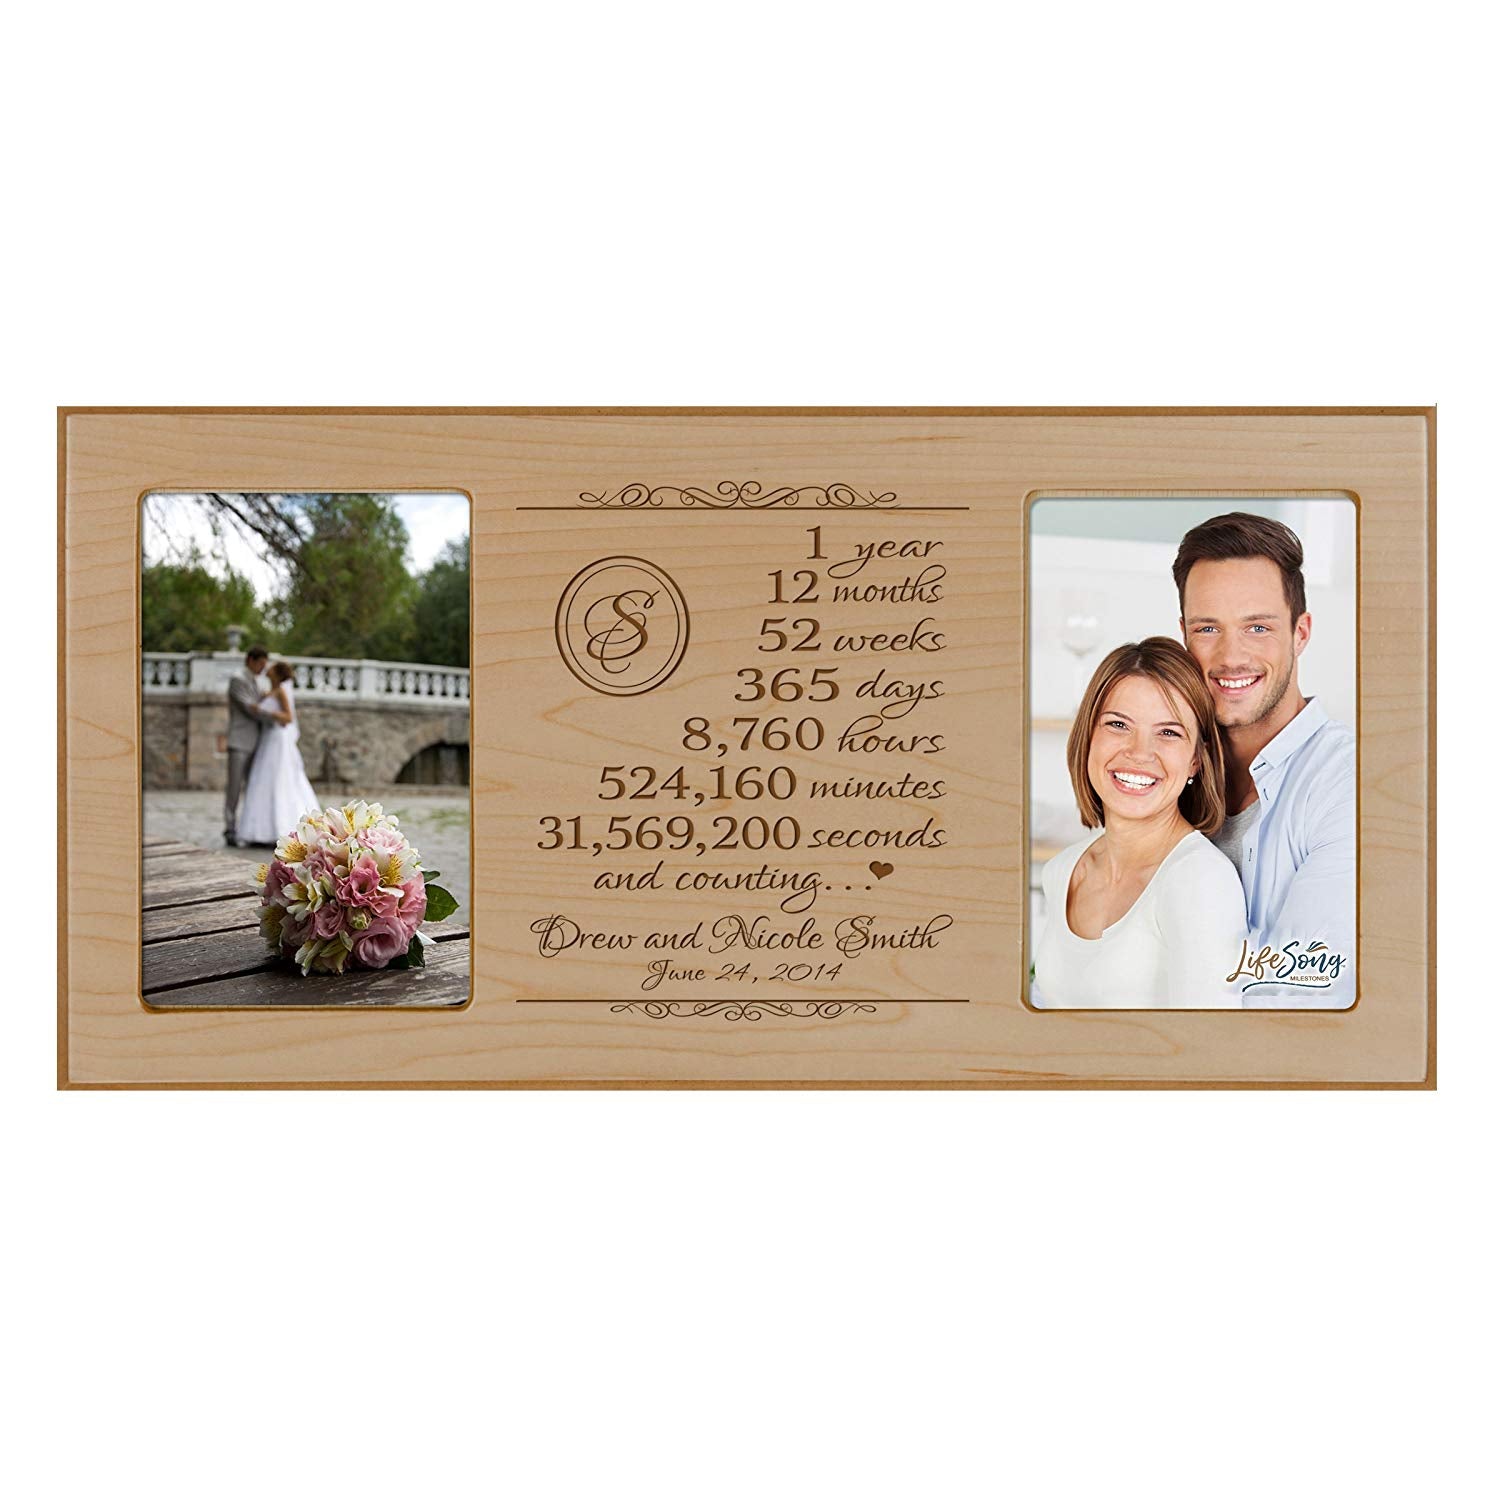 Lifesong Milestones Personalized Picture Frame for Couples 1st Wedding Anniversary Decorations